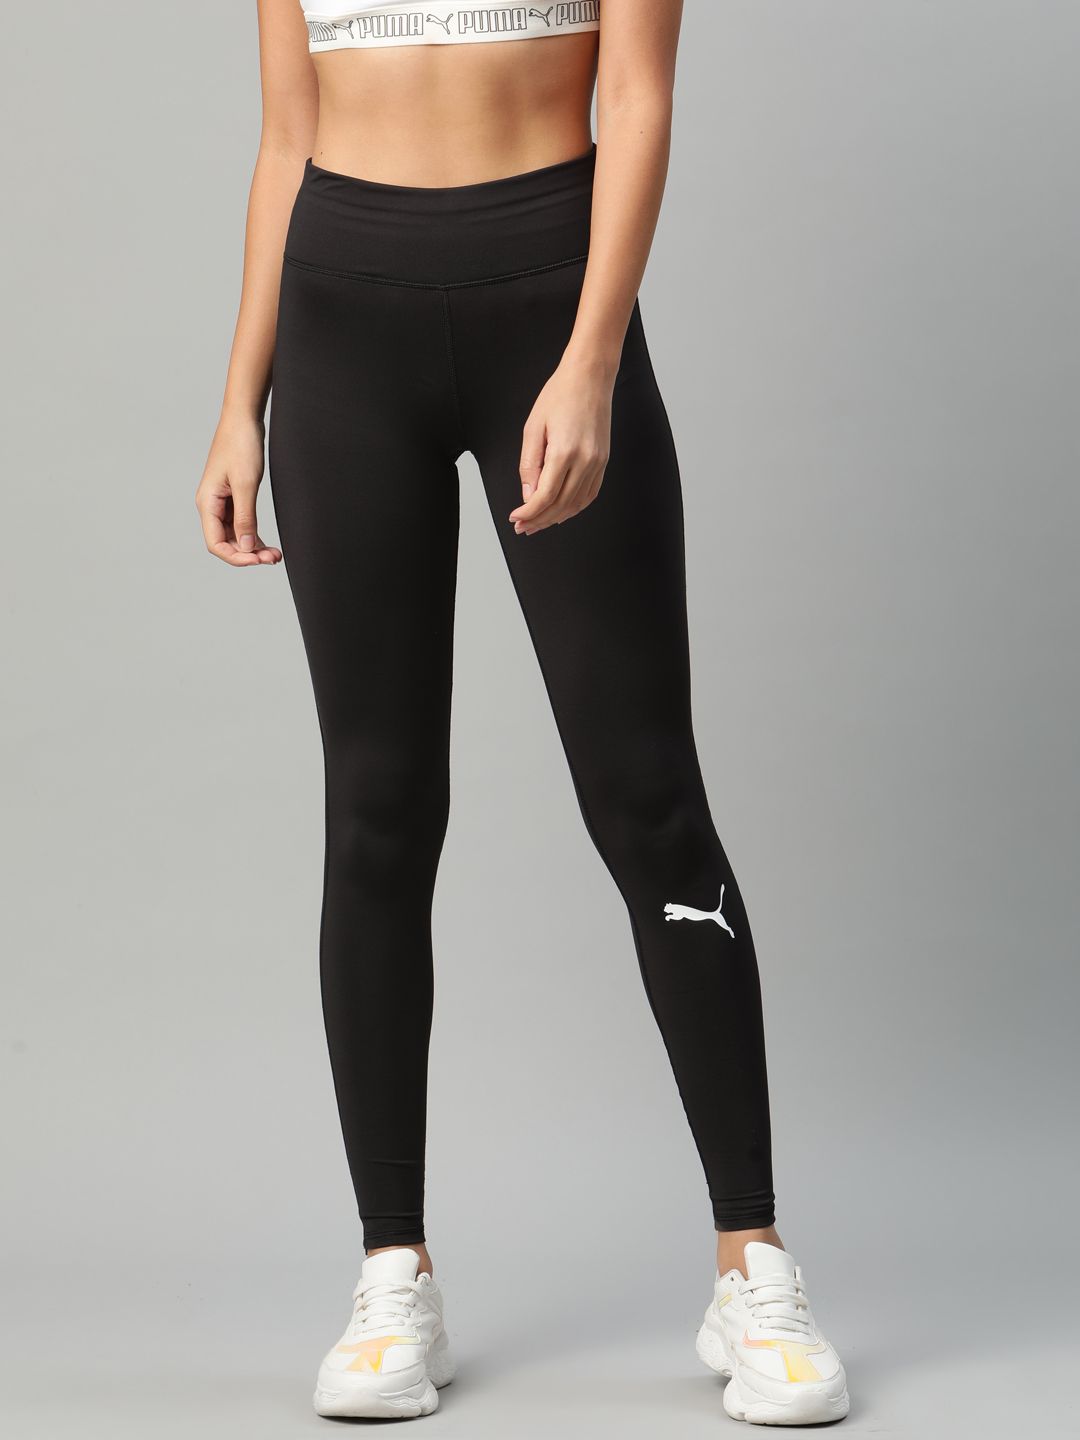 Puma Women Black Solid Cross The Line Full Length Track and Field Tights  Price in India, Full Specifications & Offers